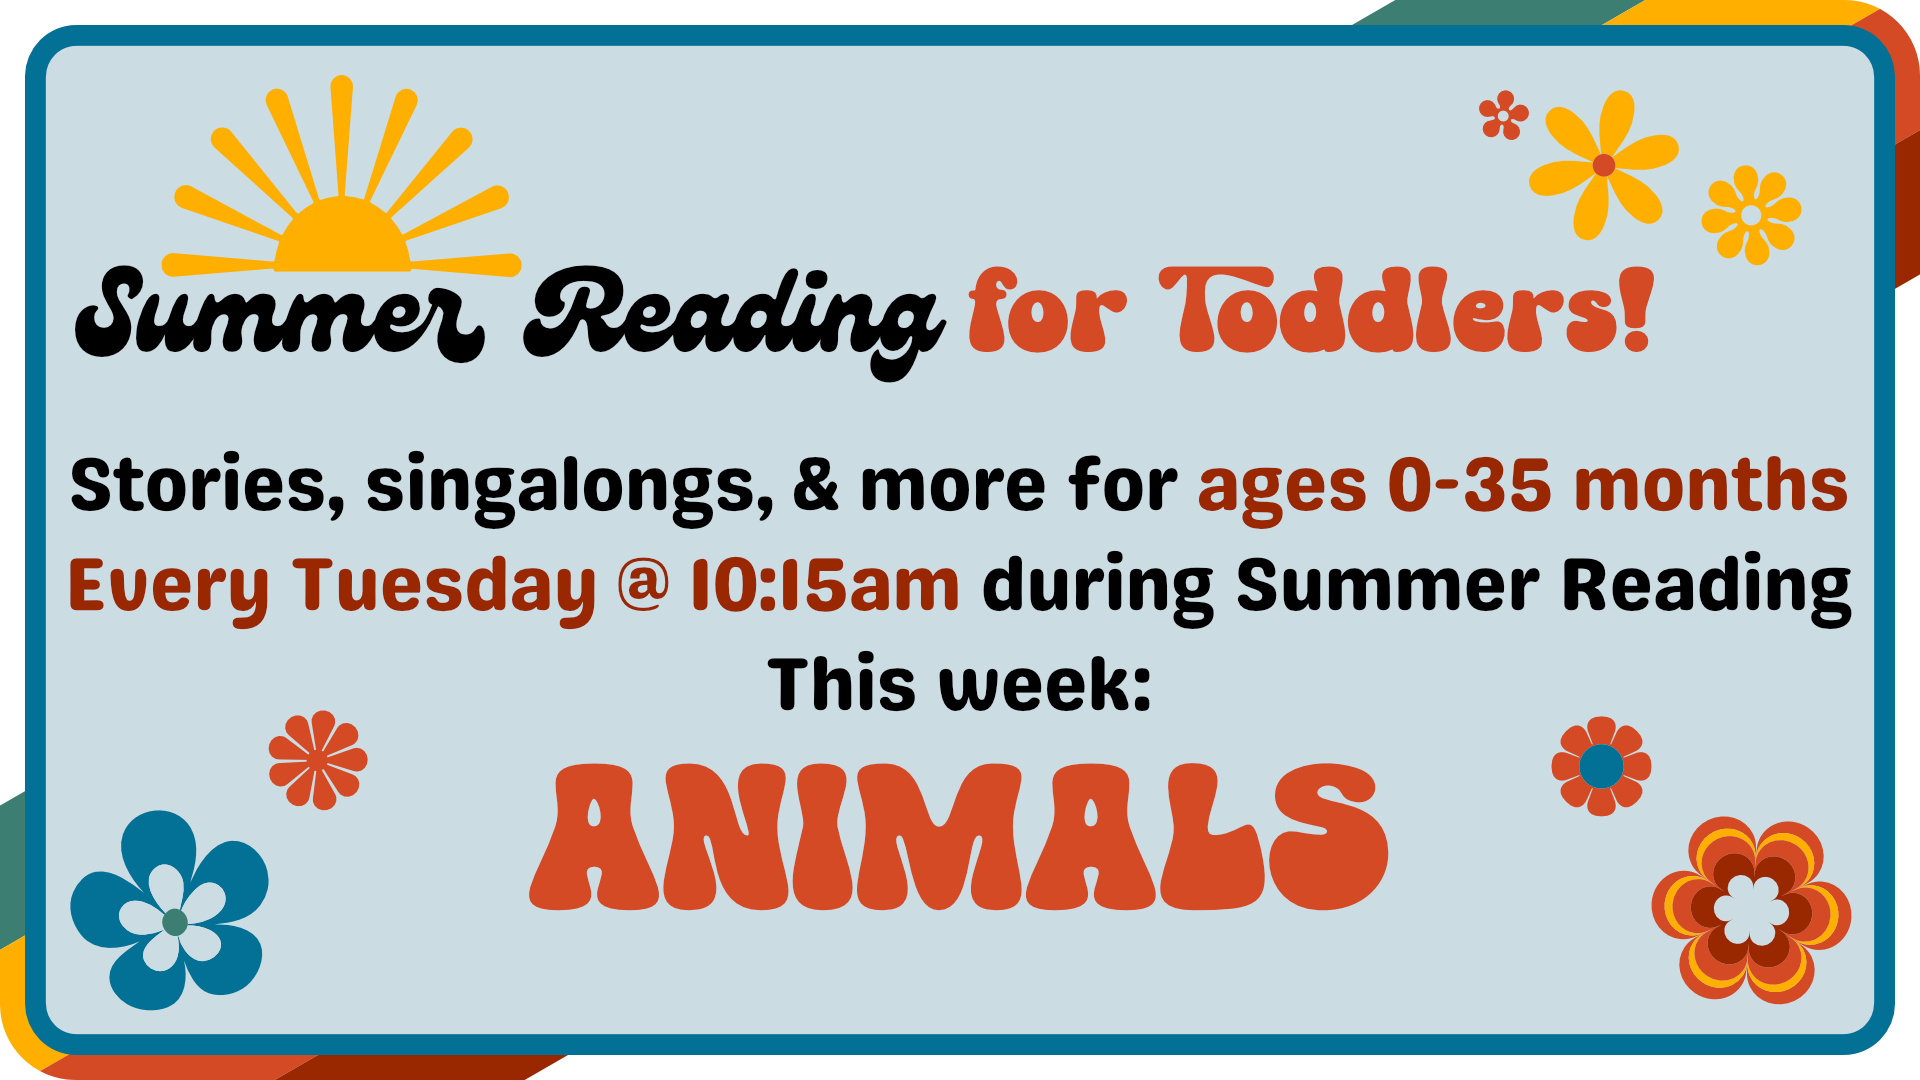 Summer Reading for toddlers, every Tuesday at 10:15am